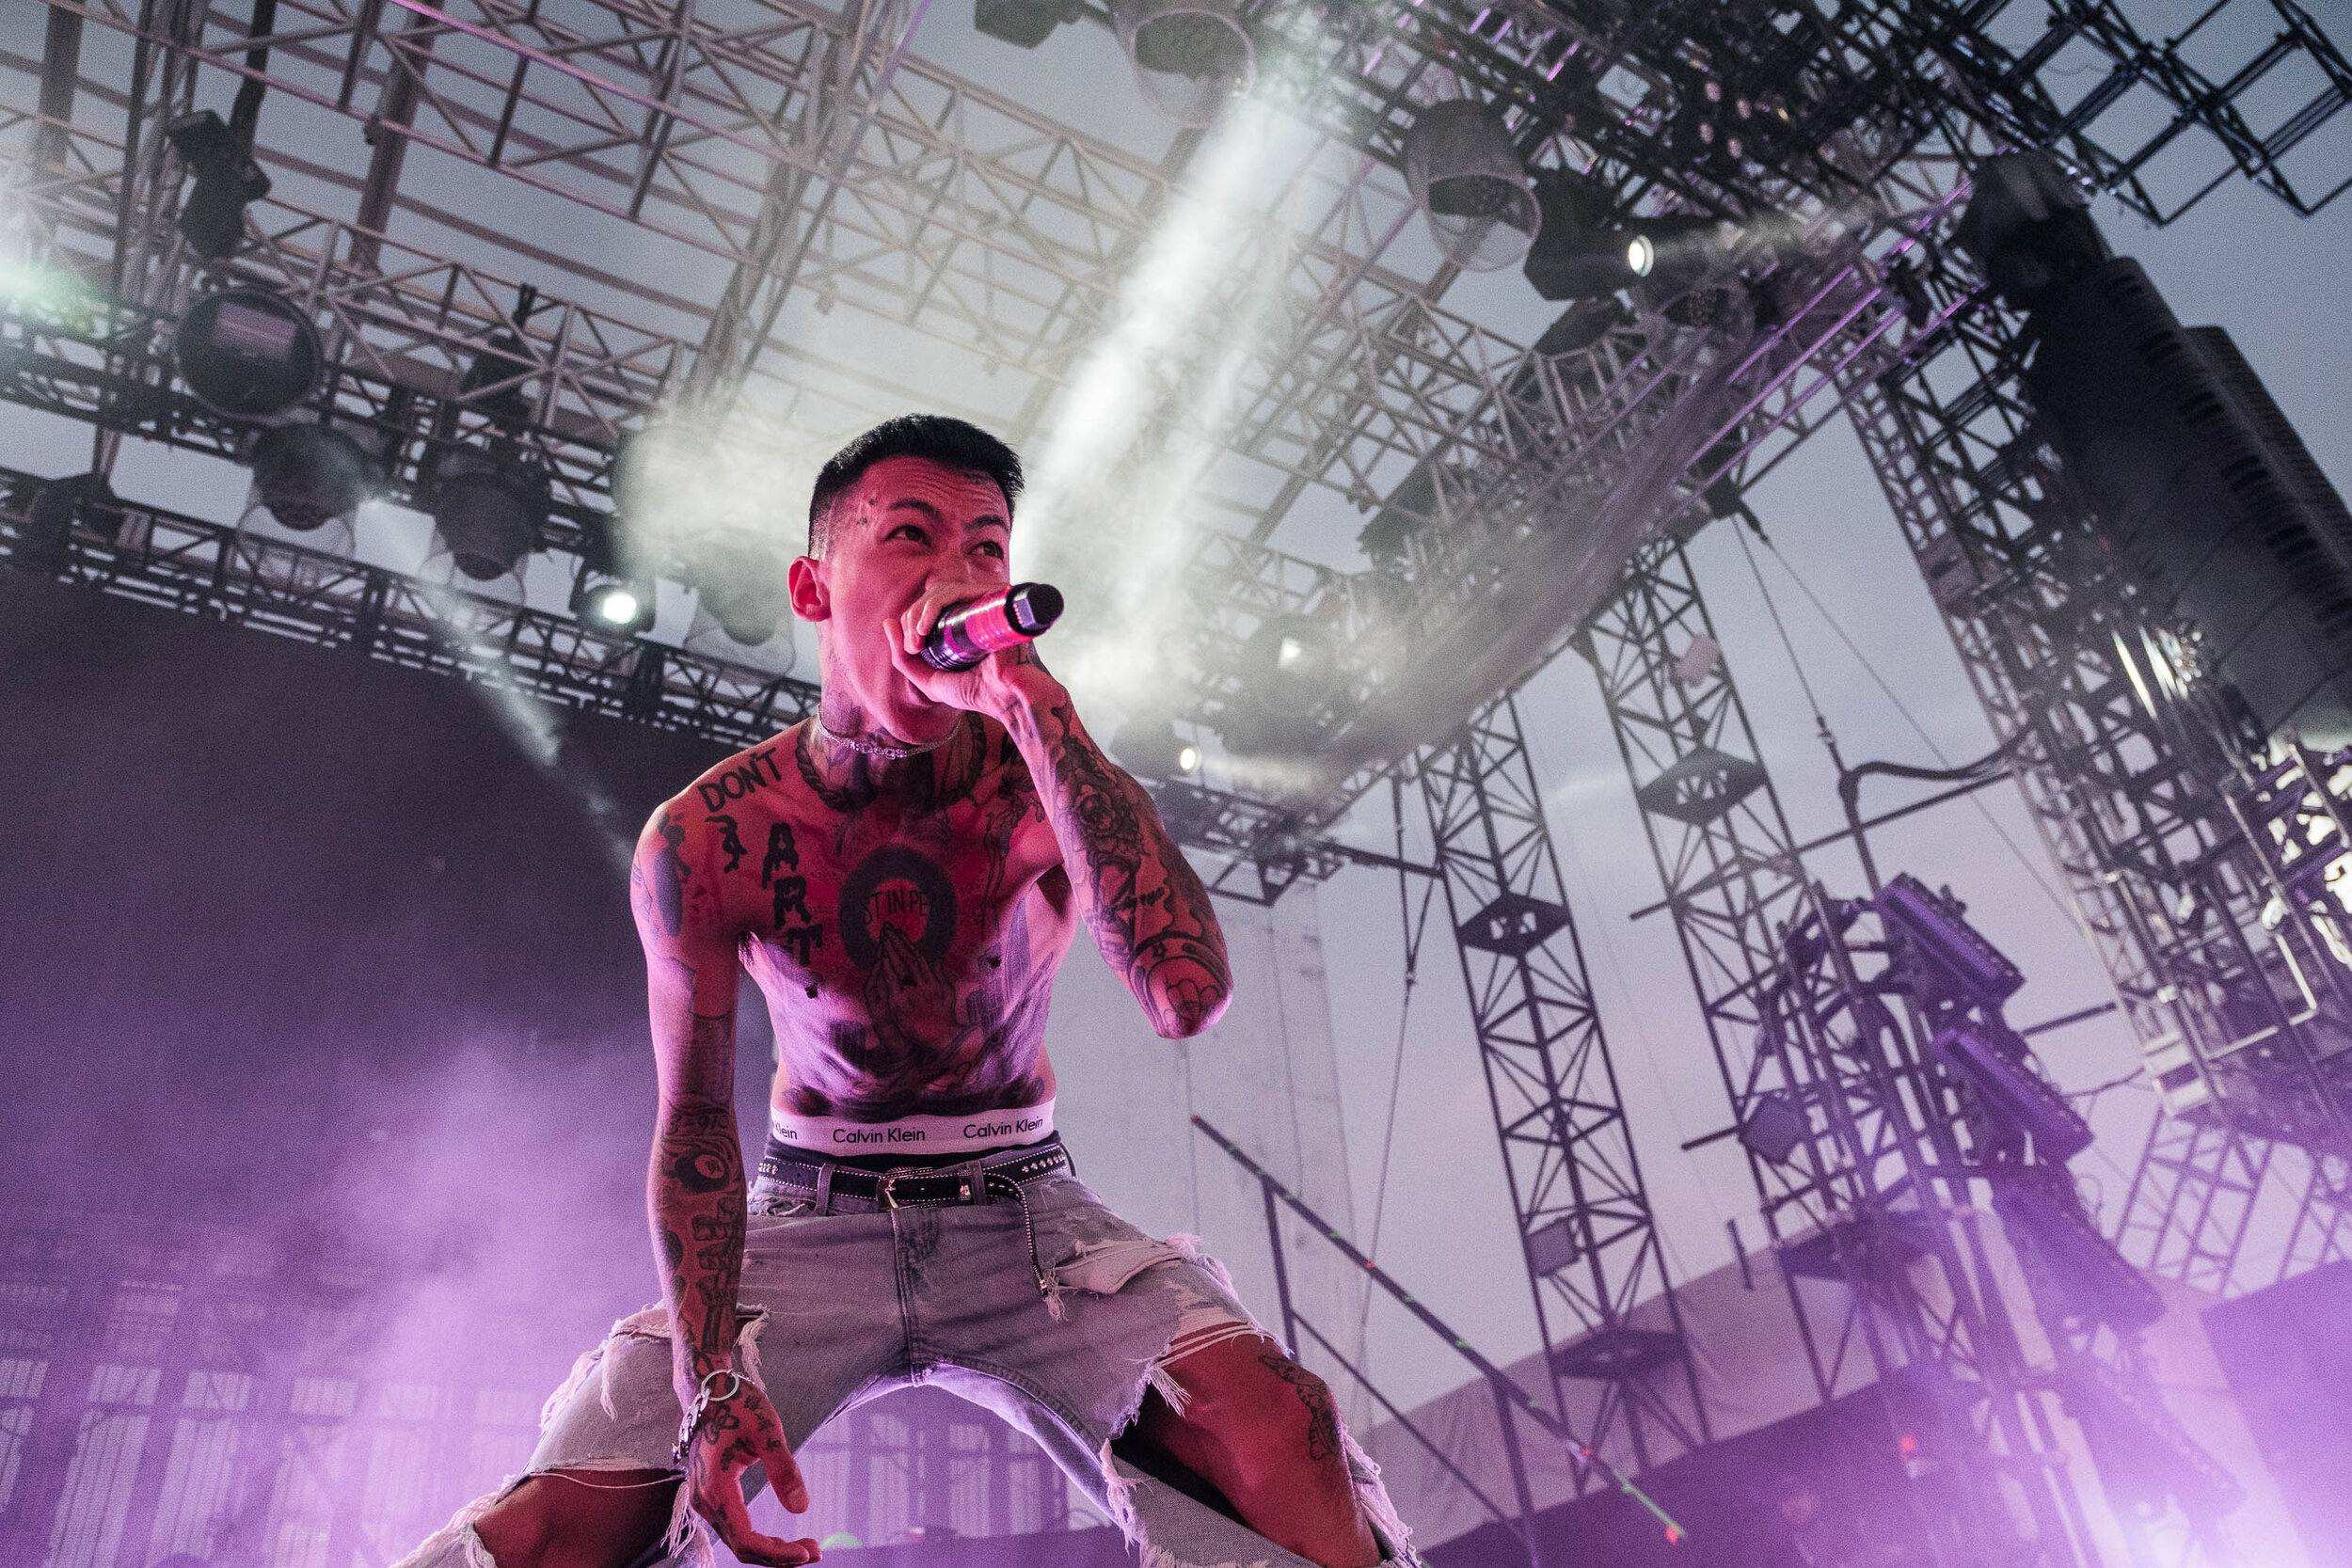  88rising specializes in importing overseas talent, like Japanese hip-hop artist KOHH, to young, internet-savvy Americans. 